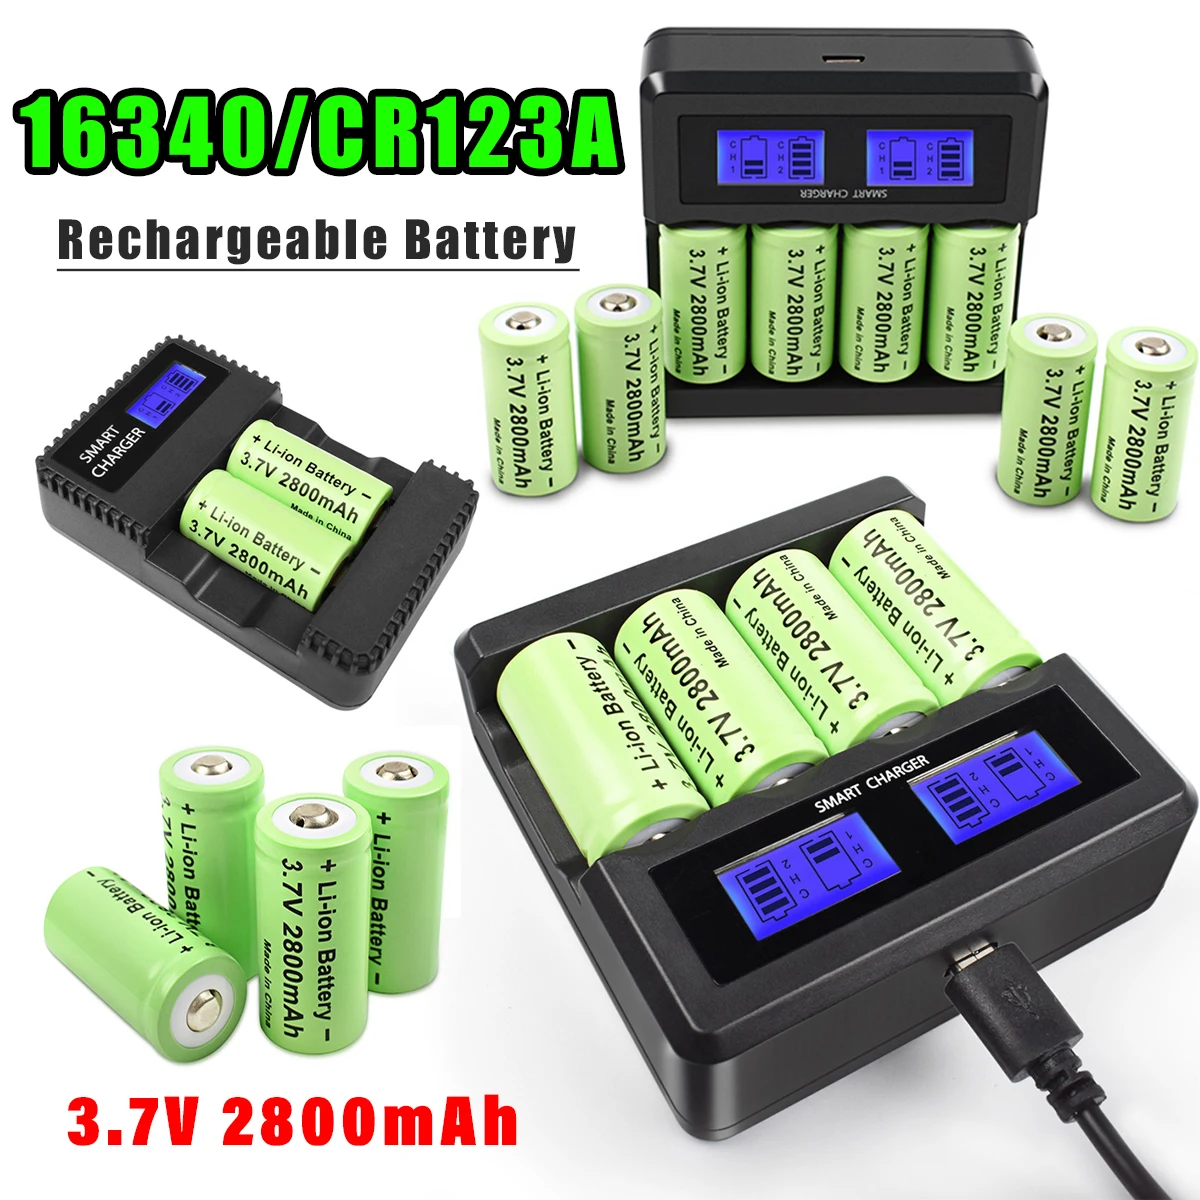 

Powtree 16P 2800mAh Rechargeable 3.7V Li-ion 16340 Batteries CR123A RCR 123 ICR Battery for LED Flashlight Travel Wall Charger